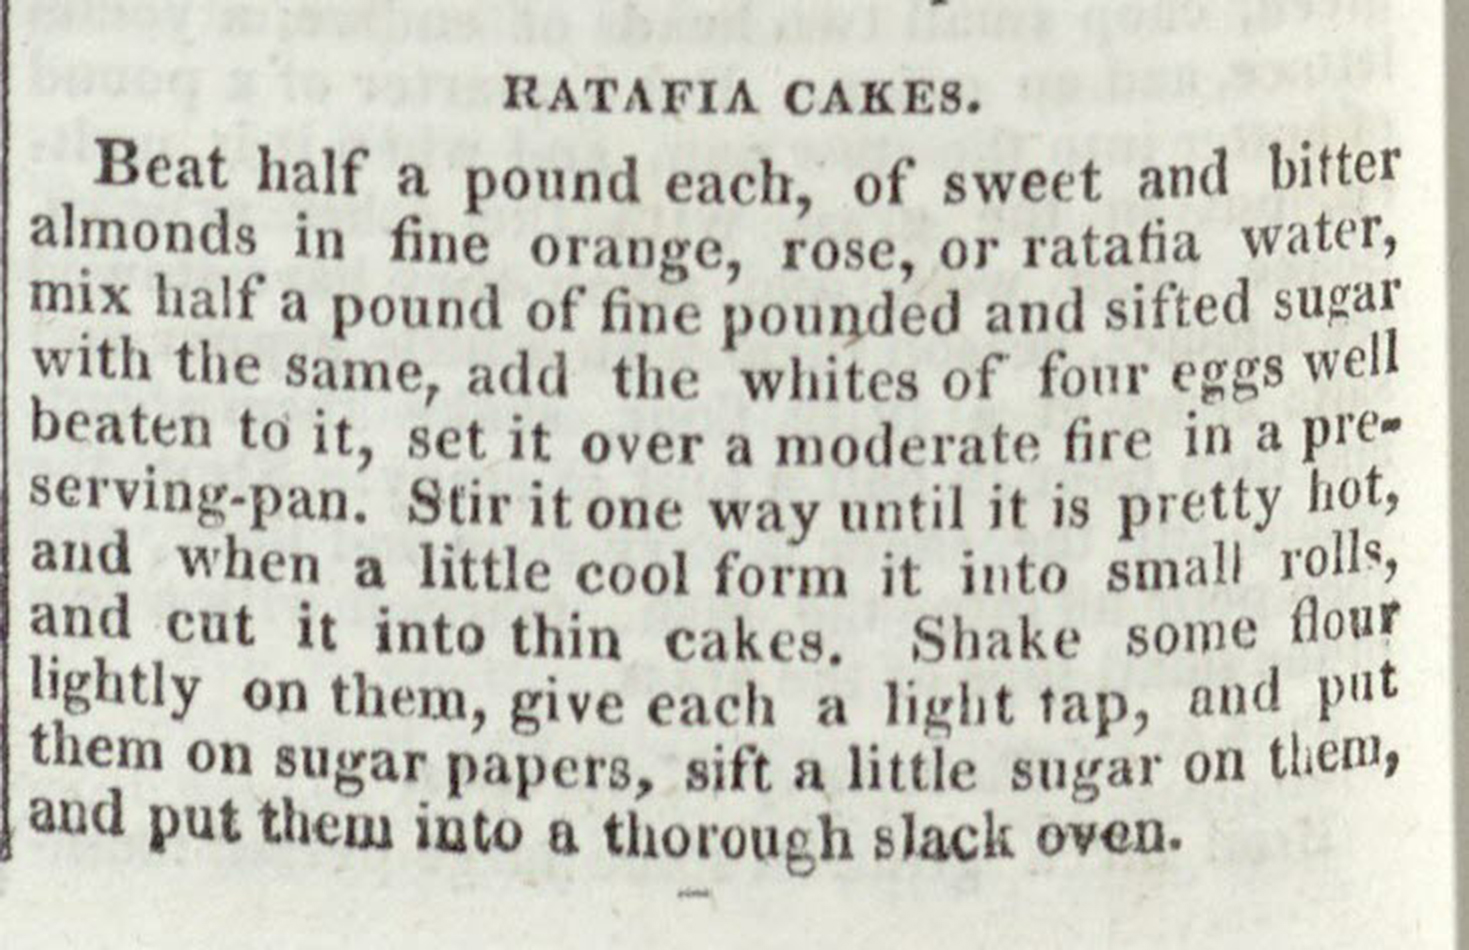 Recipe for ratafia cakes, from Colin Mackenzie’s Five Thousand Recipes in all the Useful and Domestic Arts. With bitter almonds being poisonous, I opted for just using sweet almonds. St Andrews copy sTX154.M2